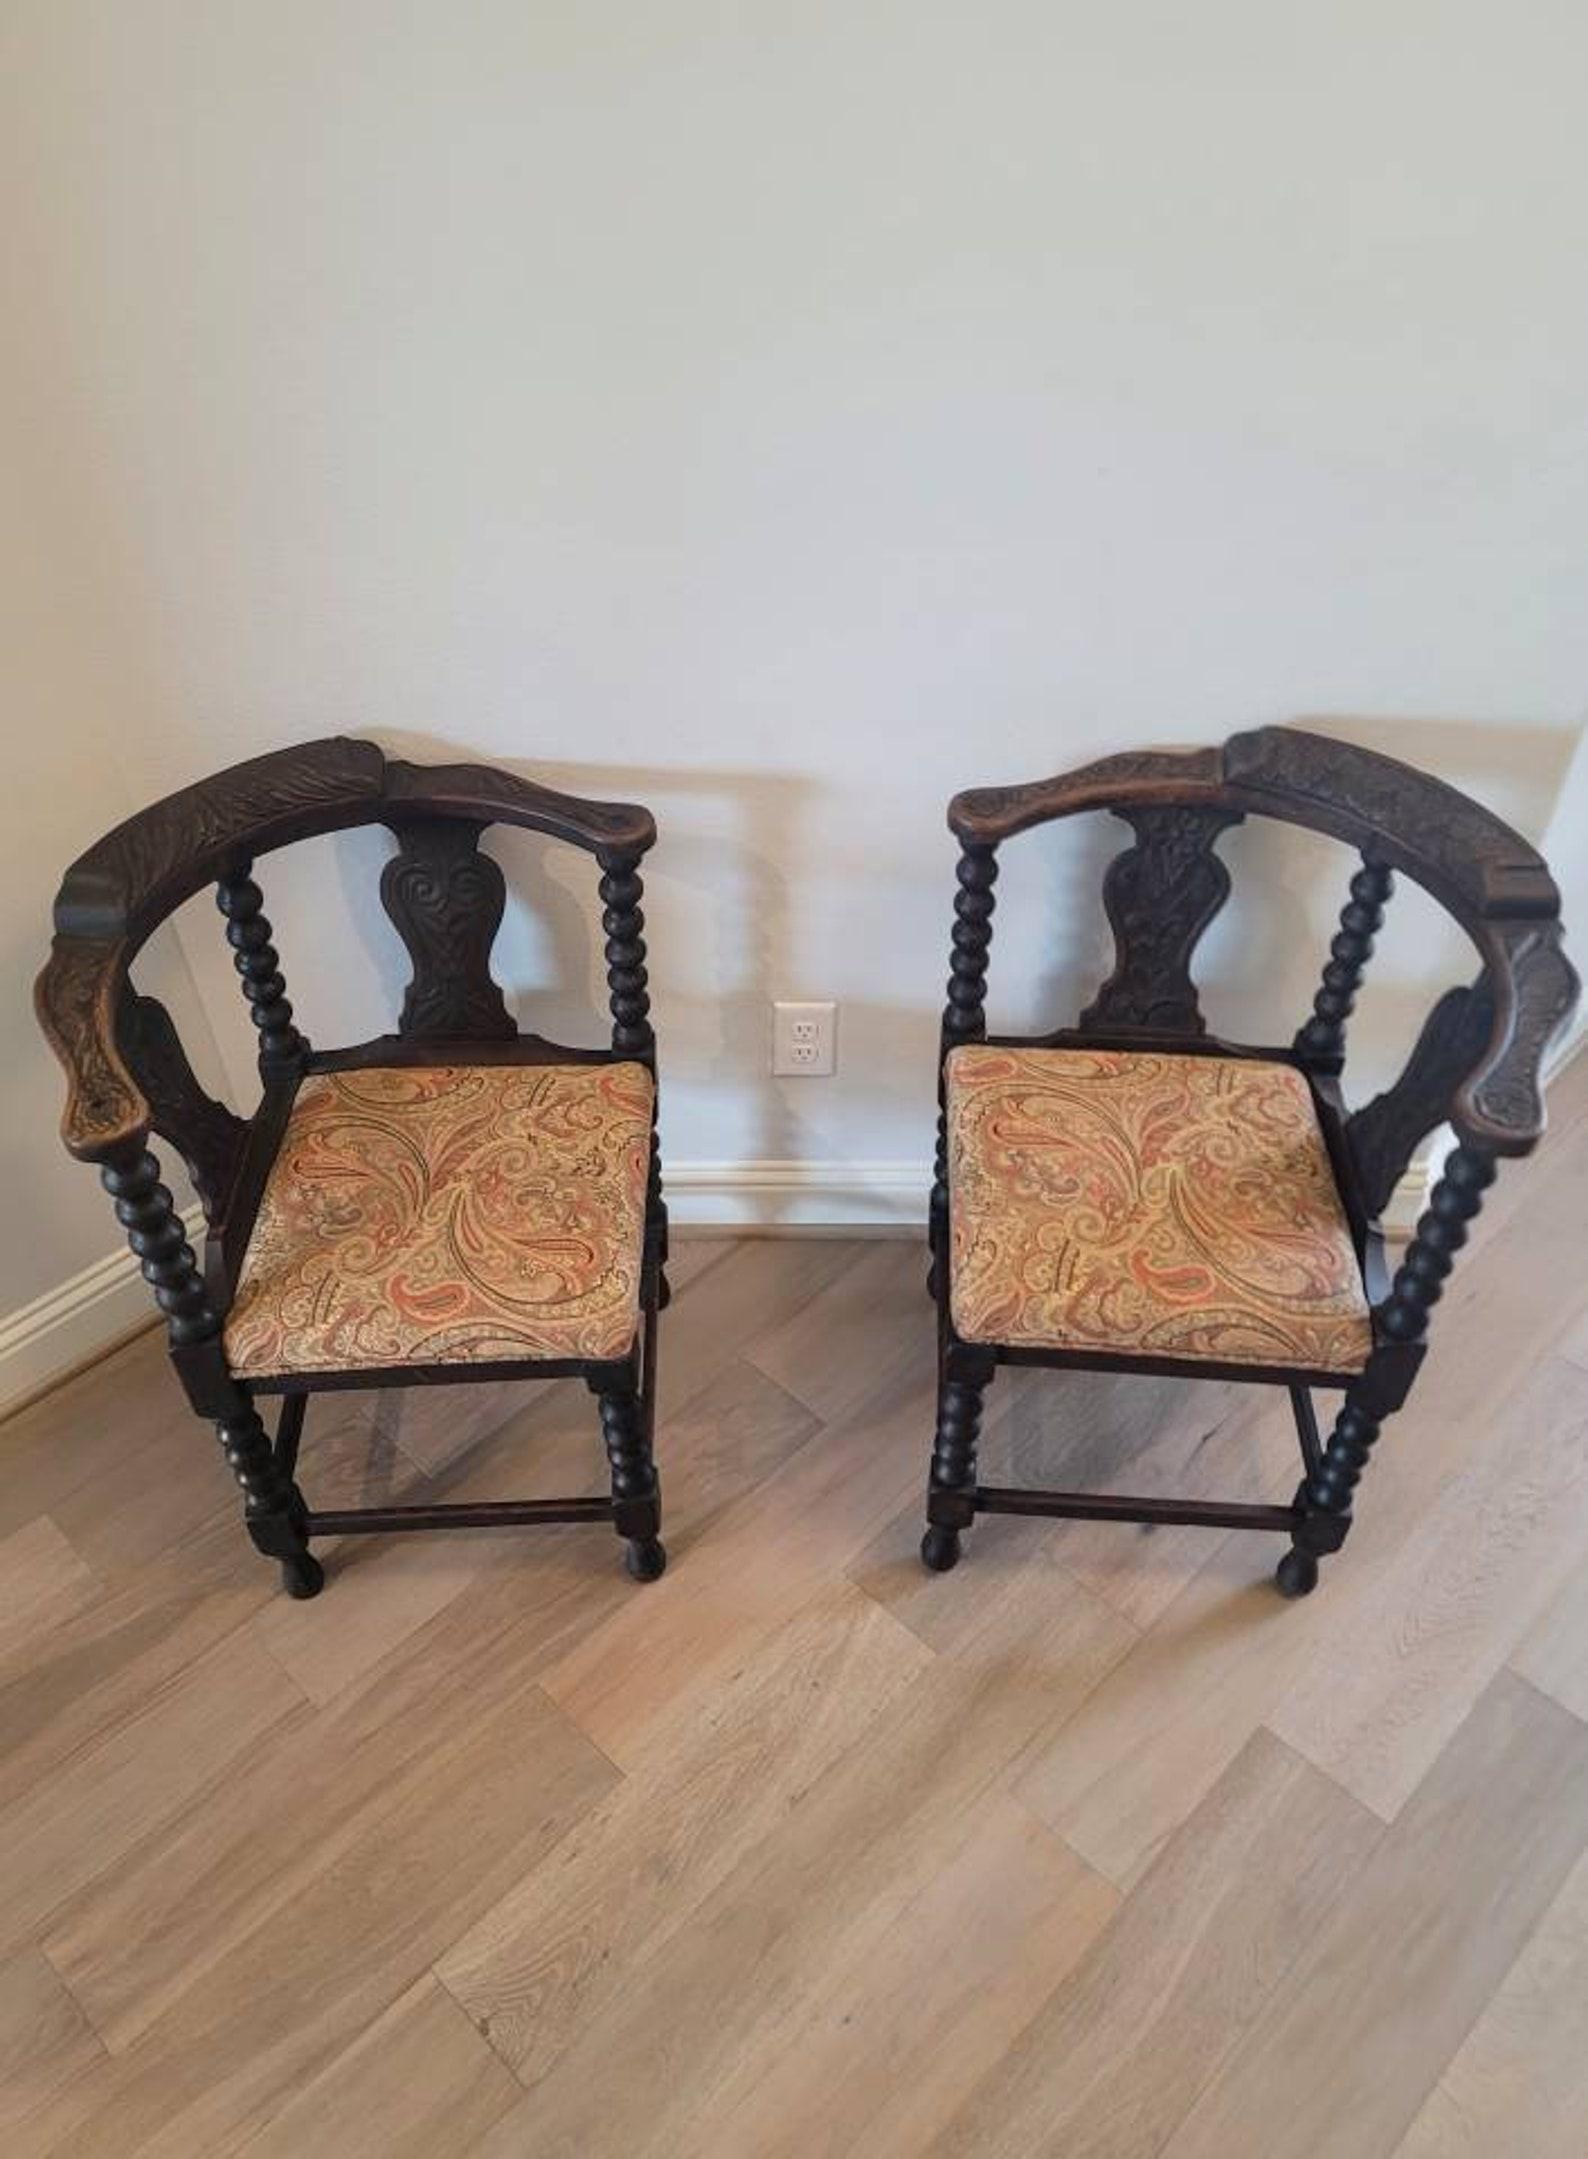 Pair of Antique European Carved Oak Corner Chairs In Good Condition For Sale In Forney, TX